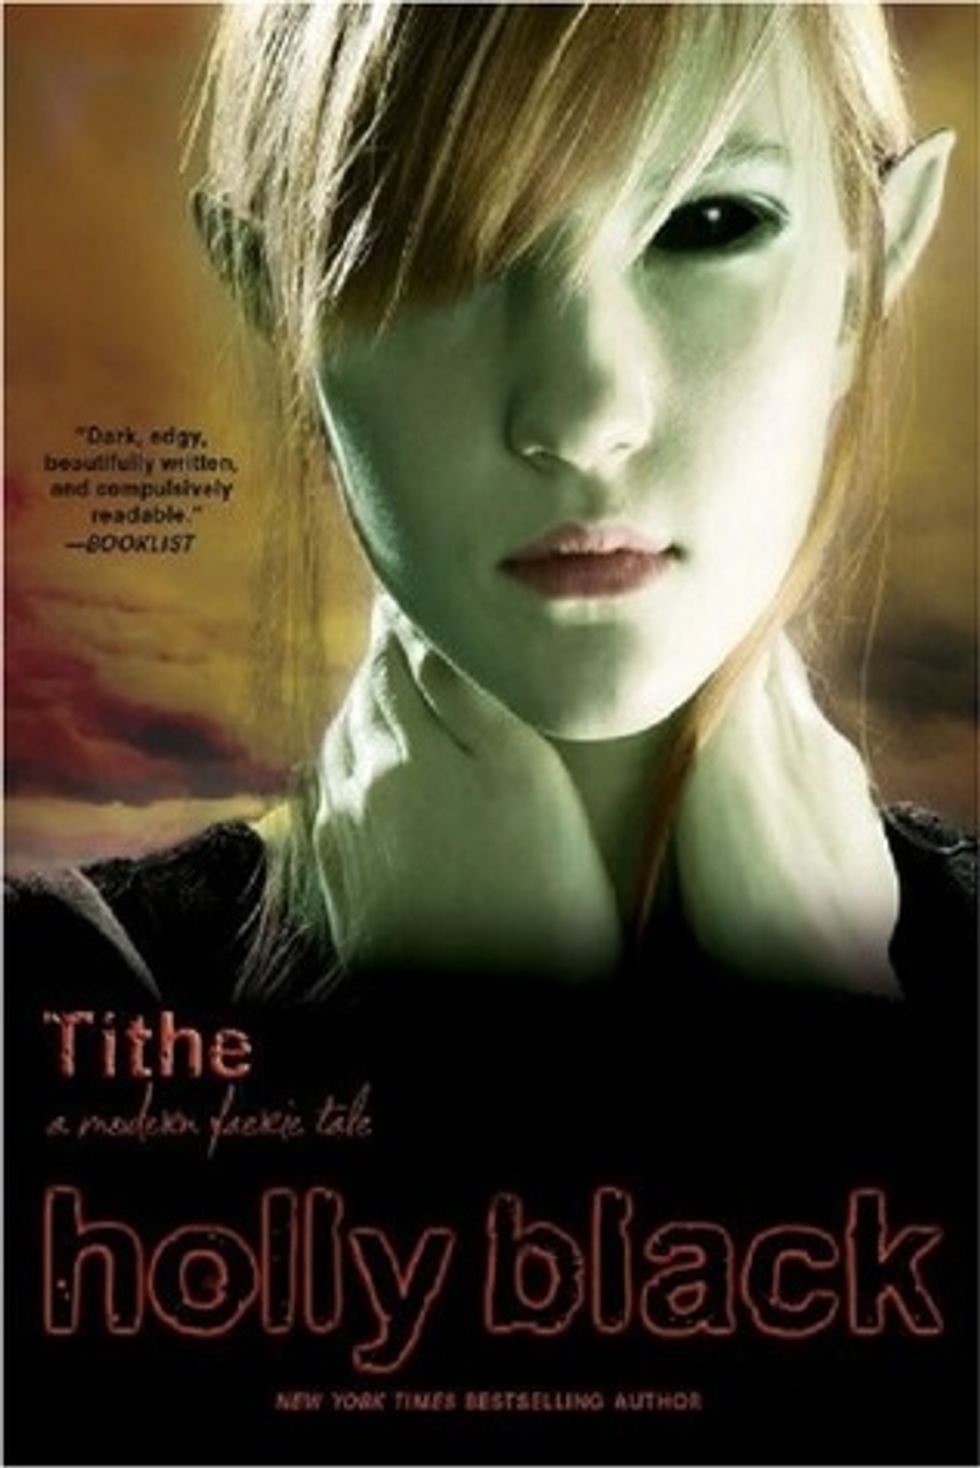 Throwback Review of Tithe by Holly Black